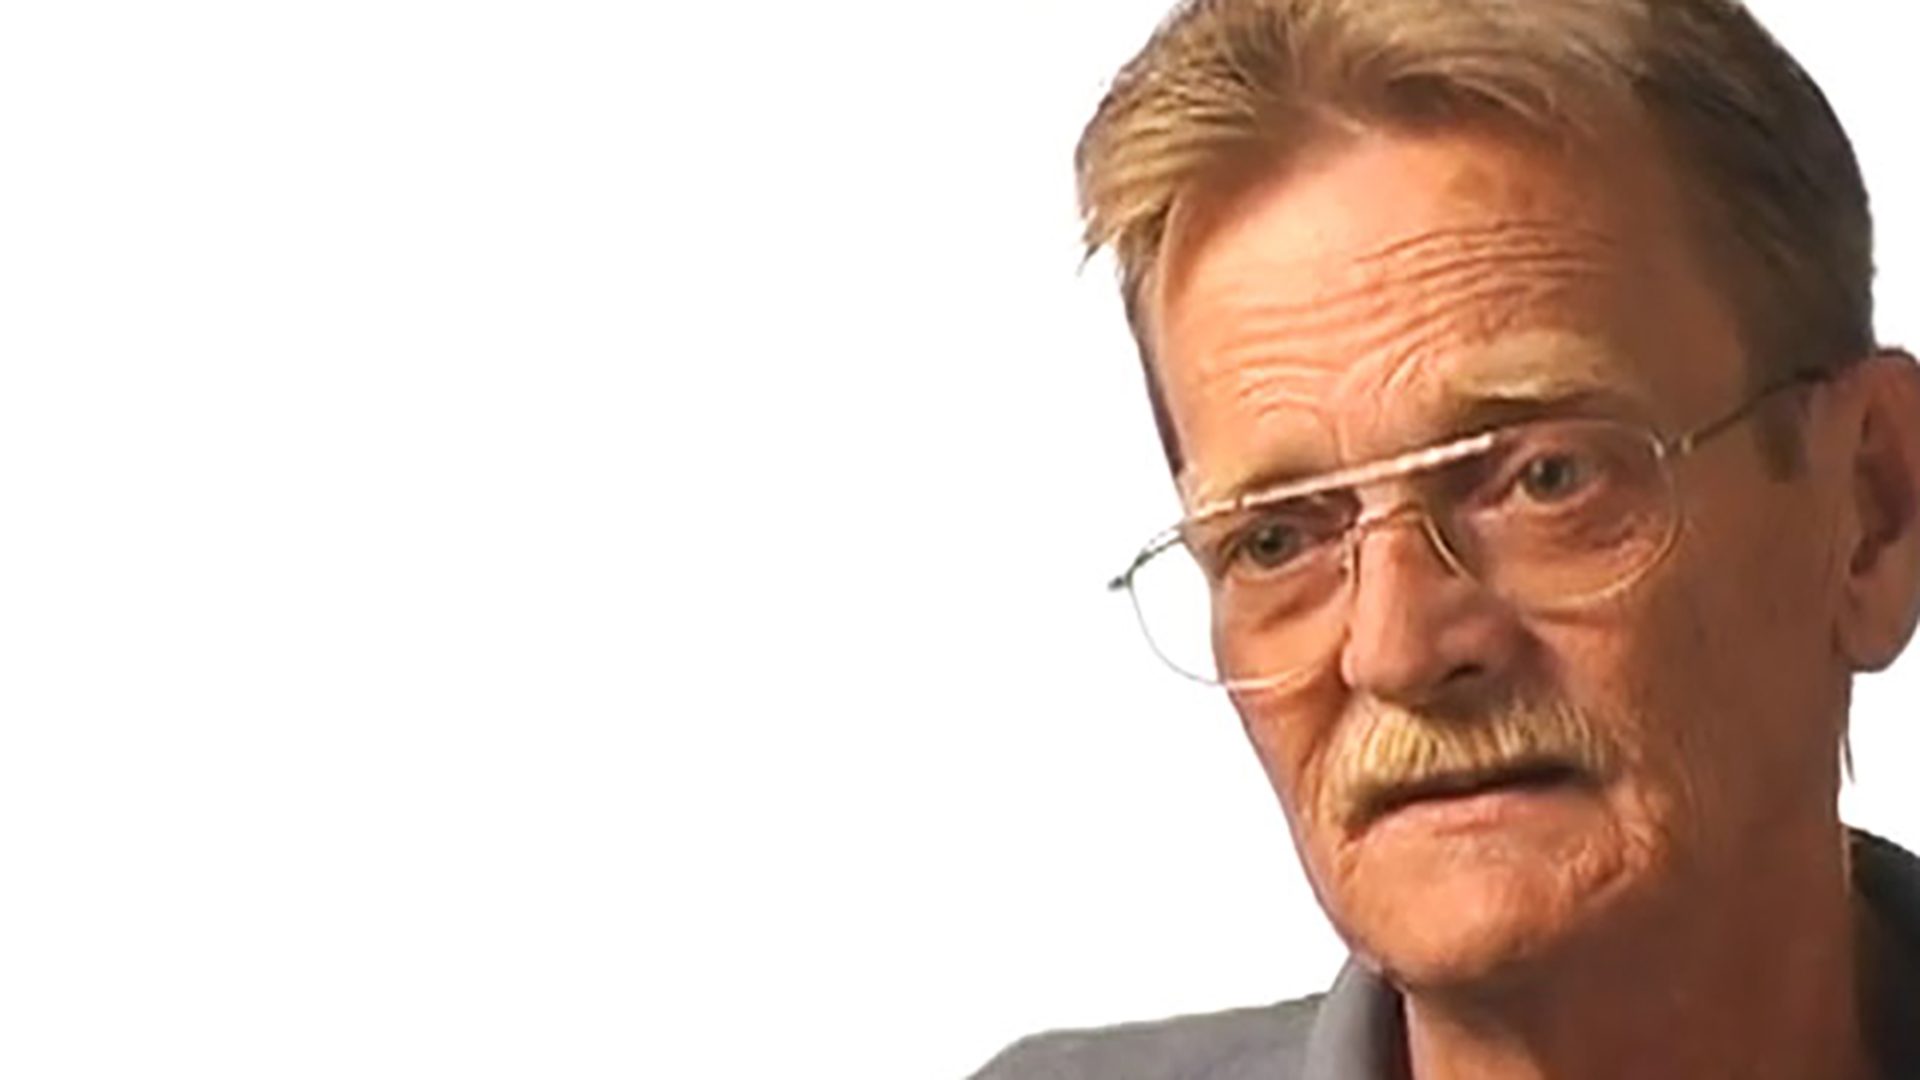 A senior man with glasses and a mustache is interviewed against a white background.